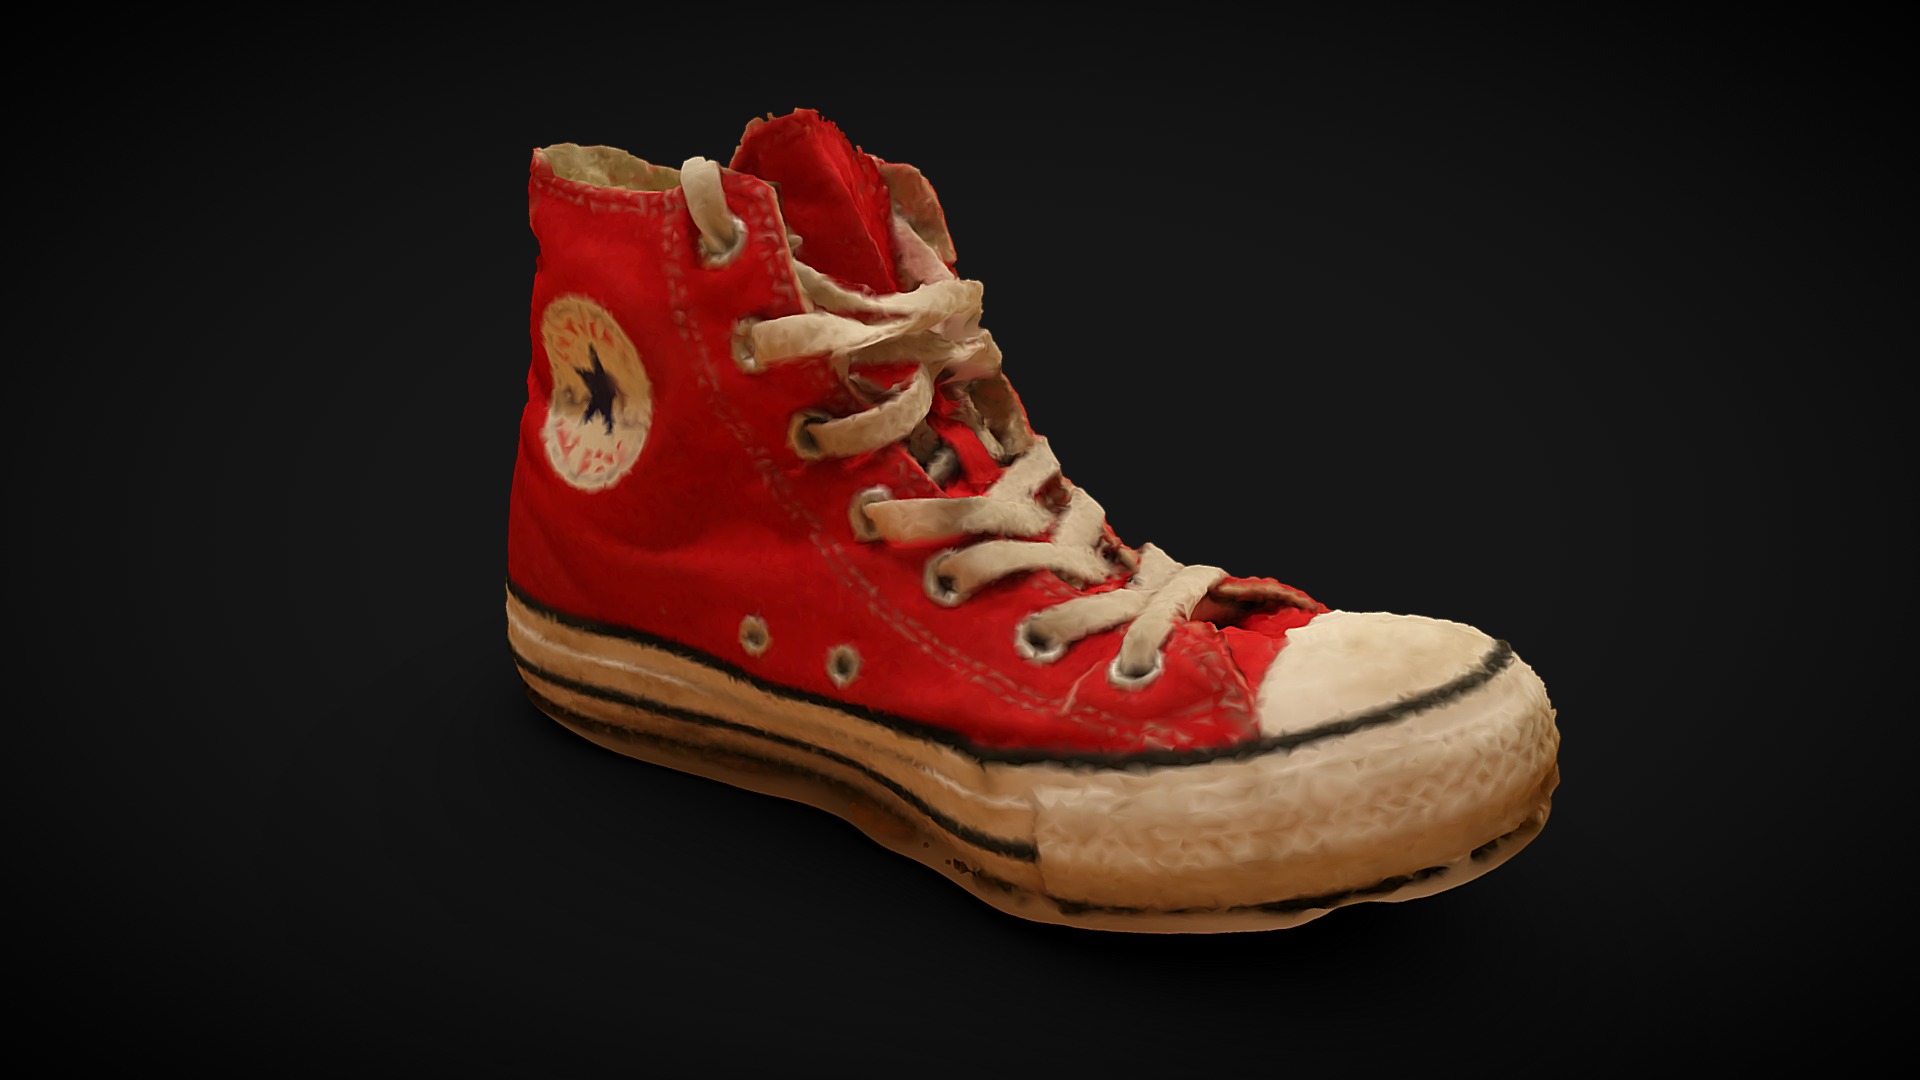 3D model Converse Shoe - This is a 3D model of the Converse Shoe. The 3D model is about a red and white shoe.